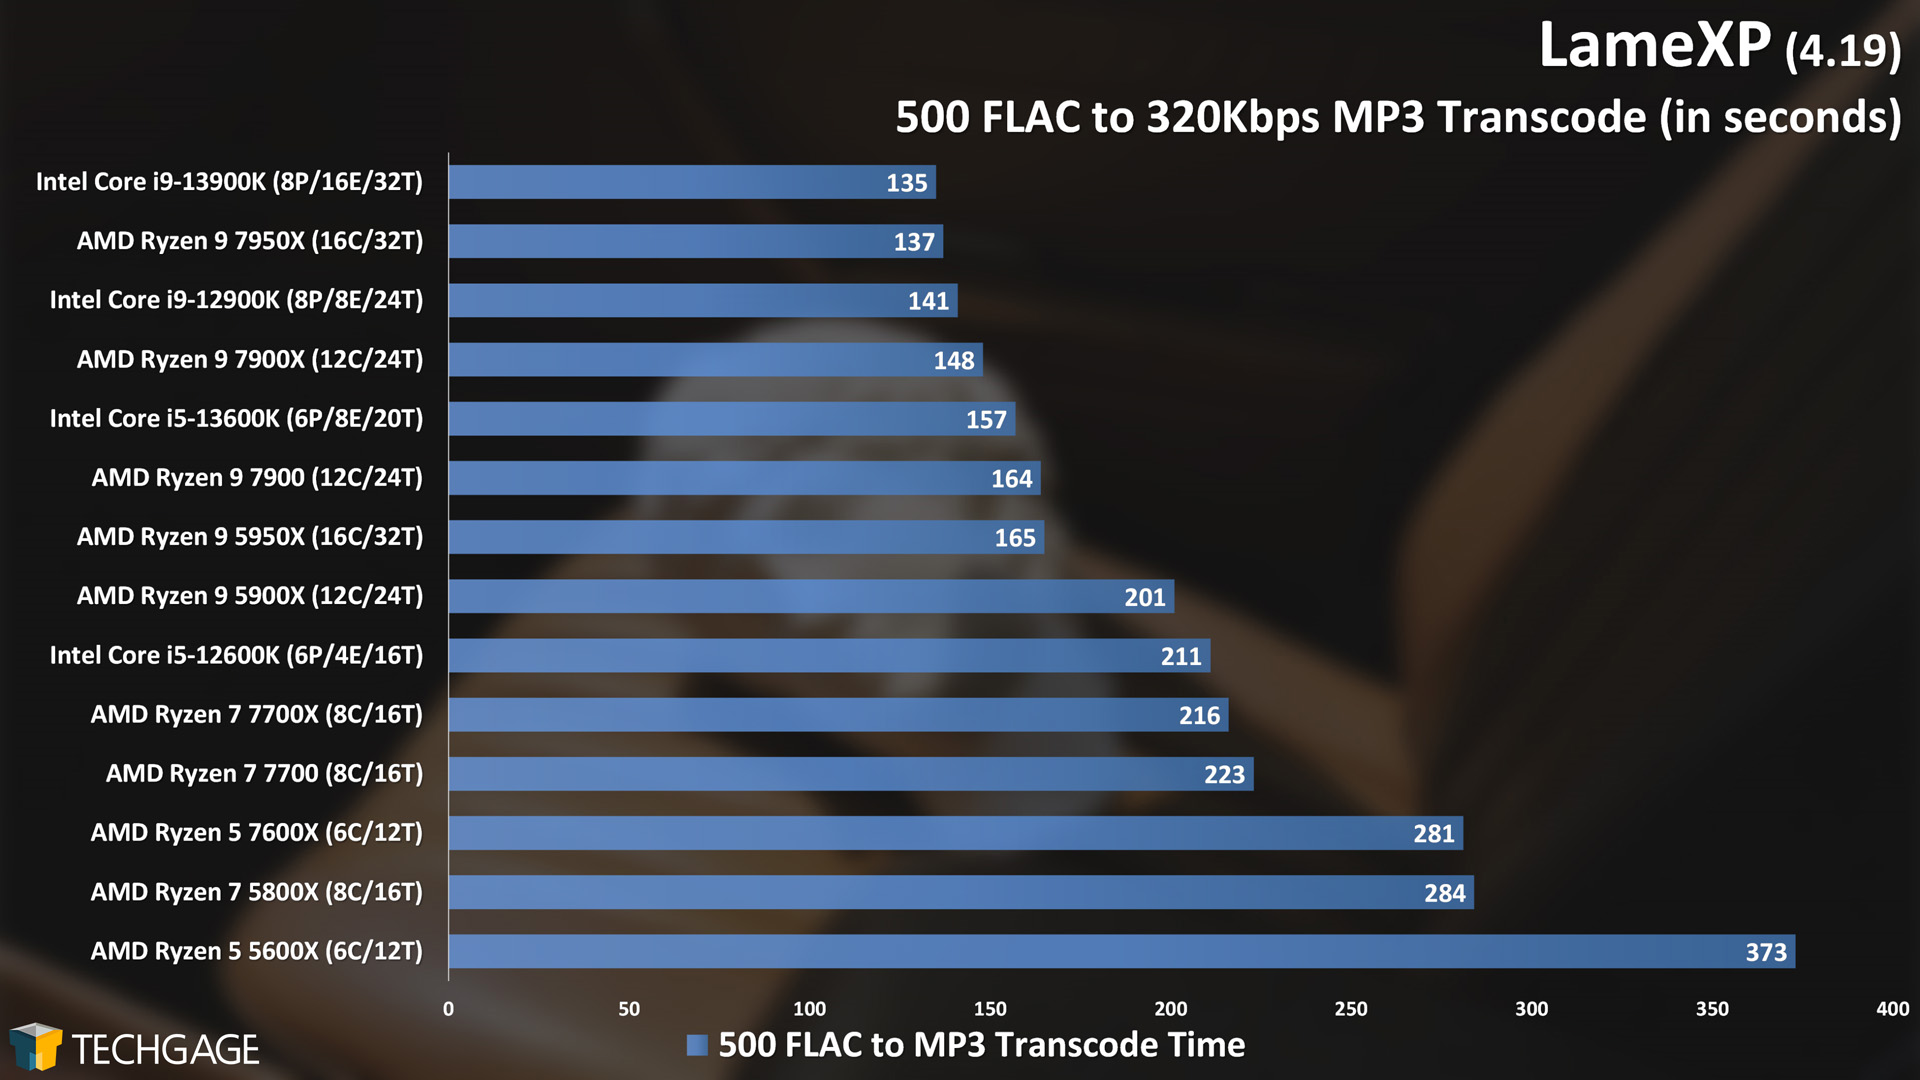 LameXP - Transcoding Performance (FLAC to MP3)